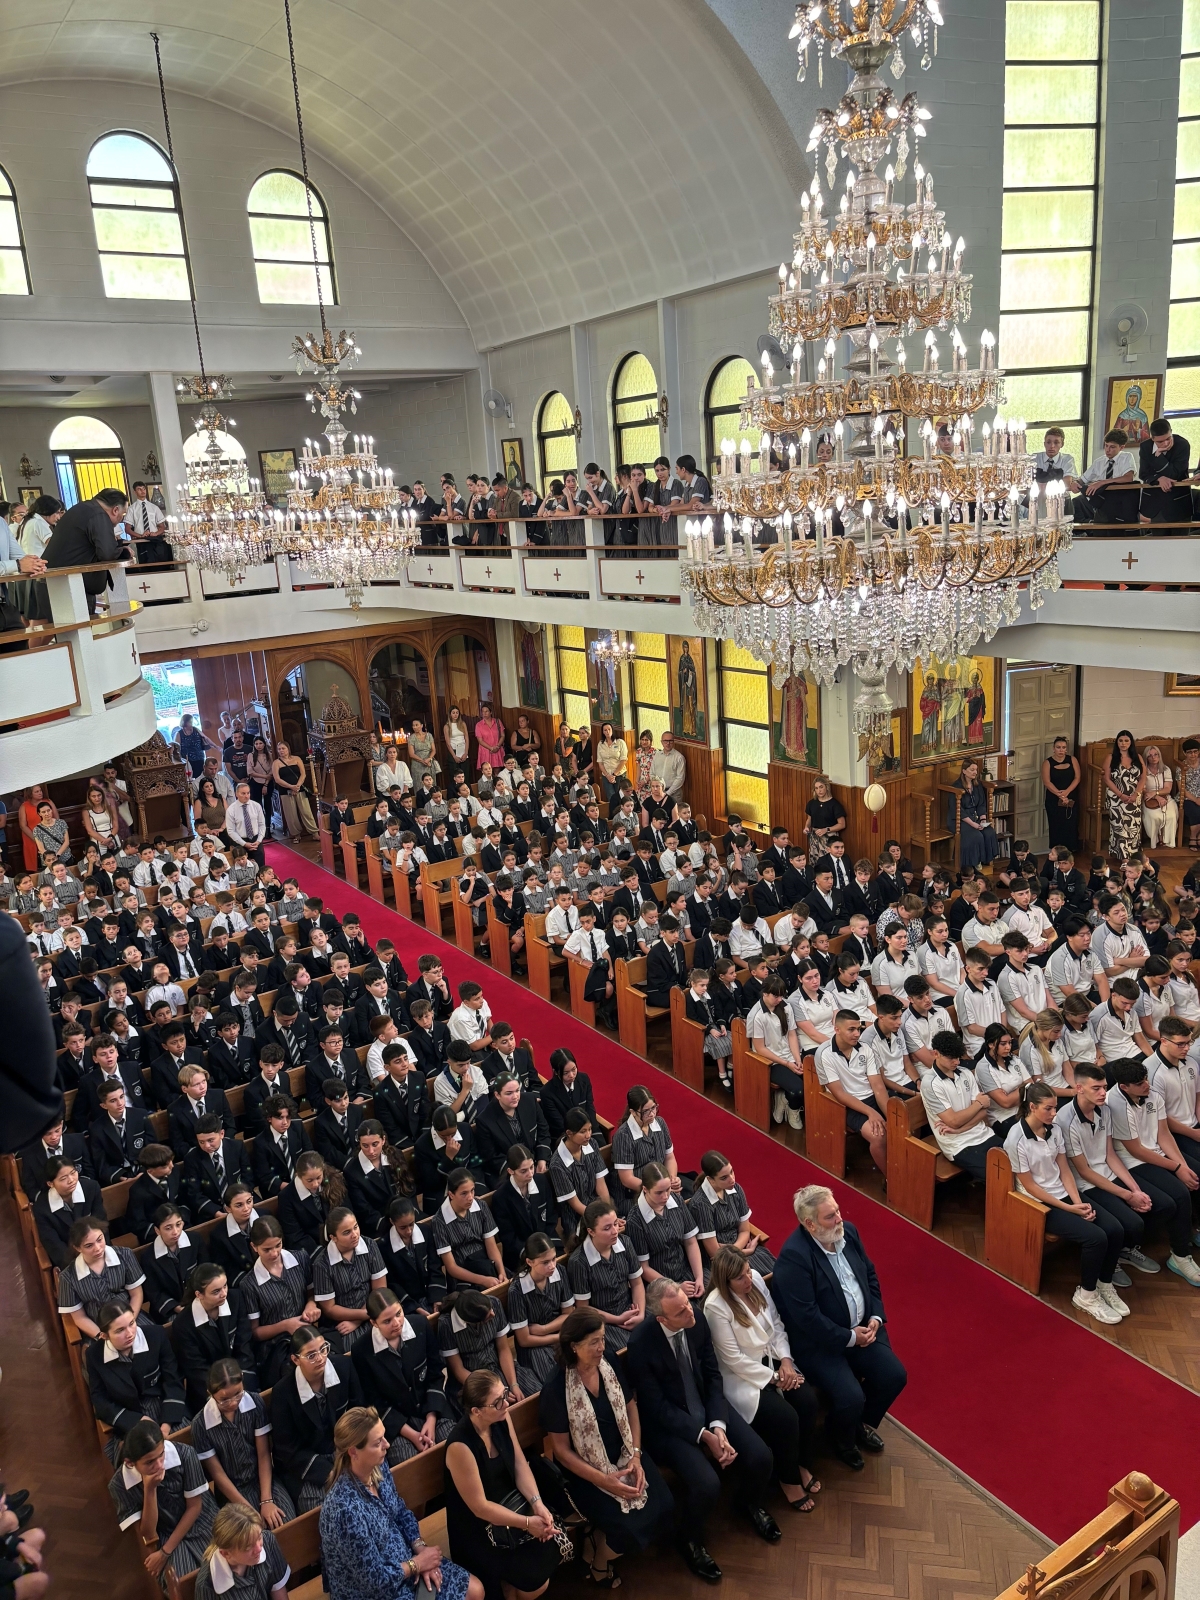 Sydney: Agiasmos Service for the start of the new school year at All Saints Grammar, Belmore